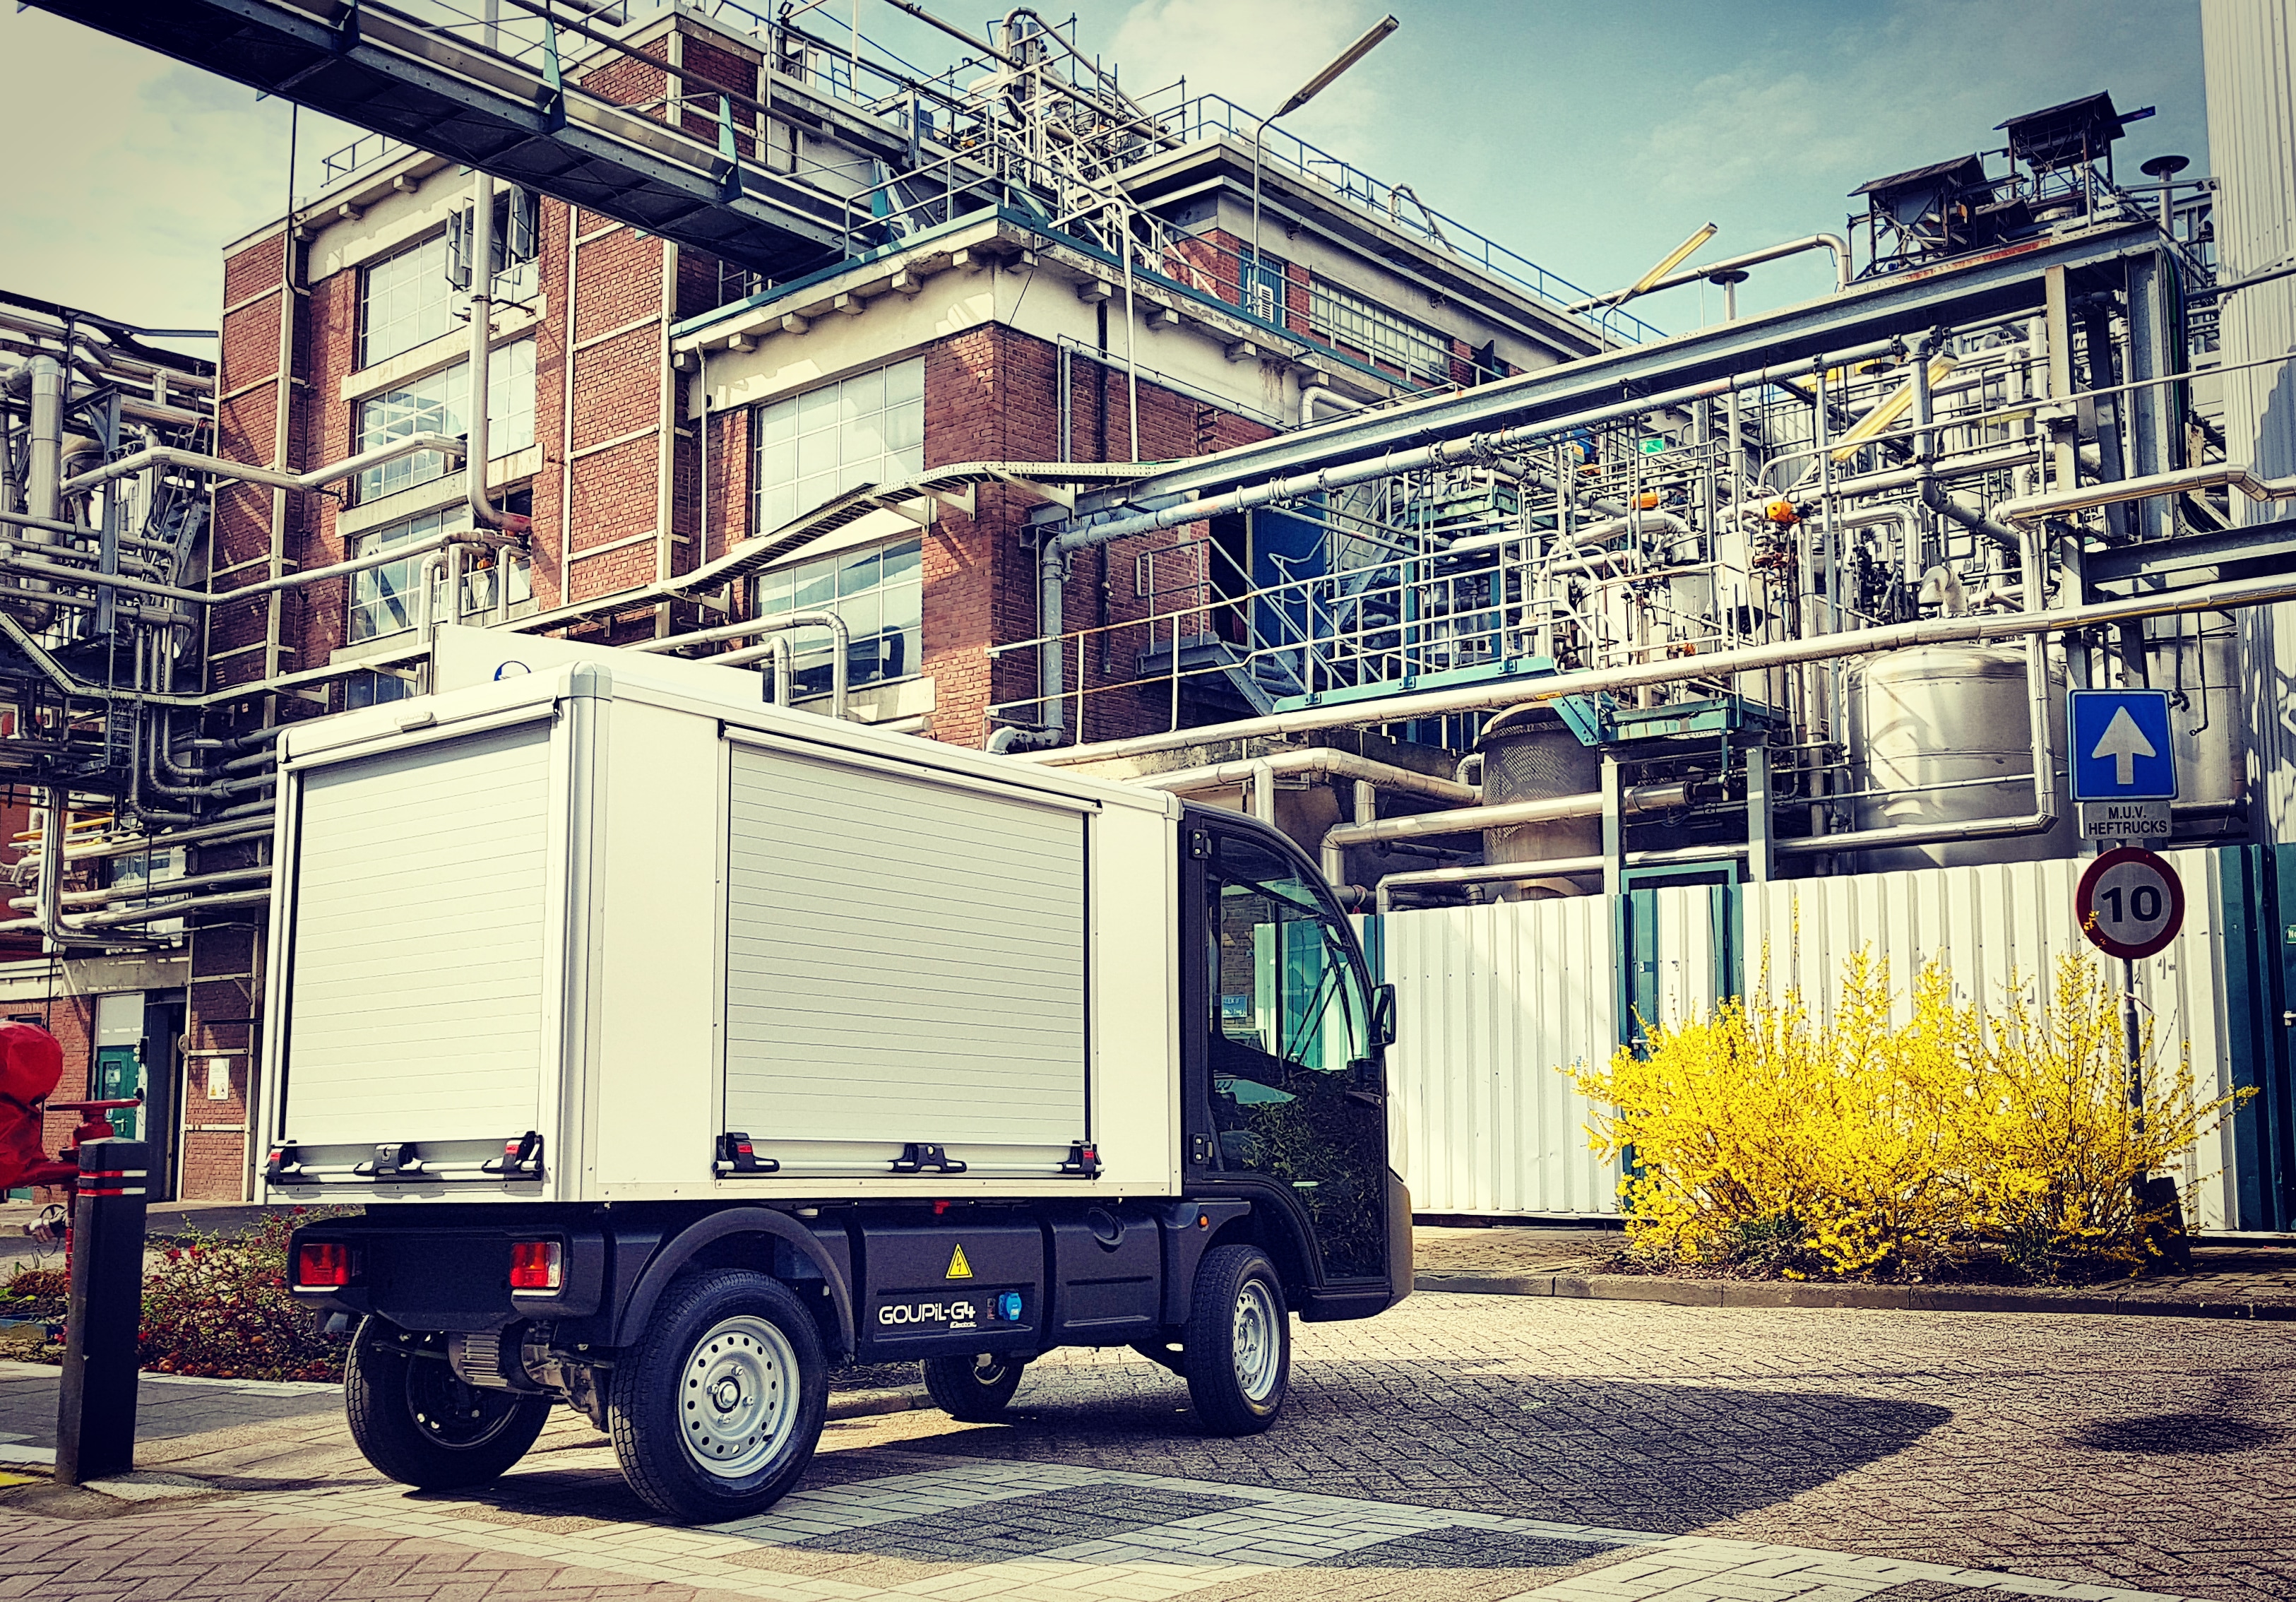 Electric utility trucks engineered to handle any logistic challenges